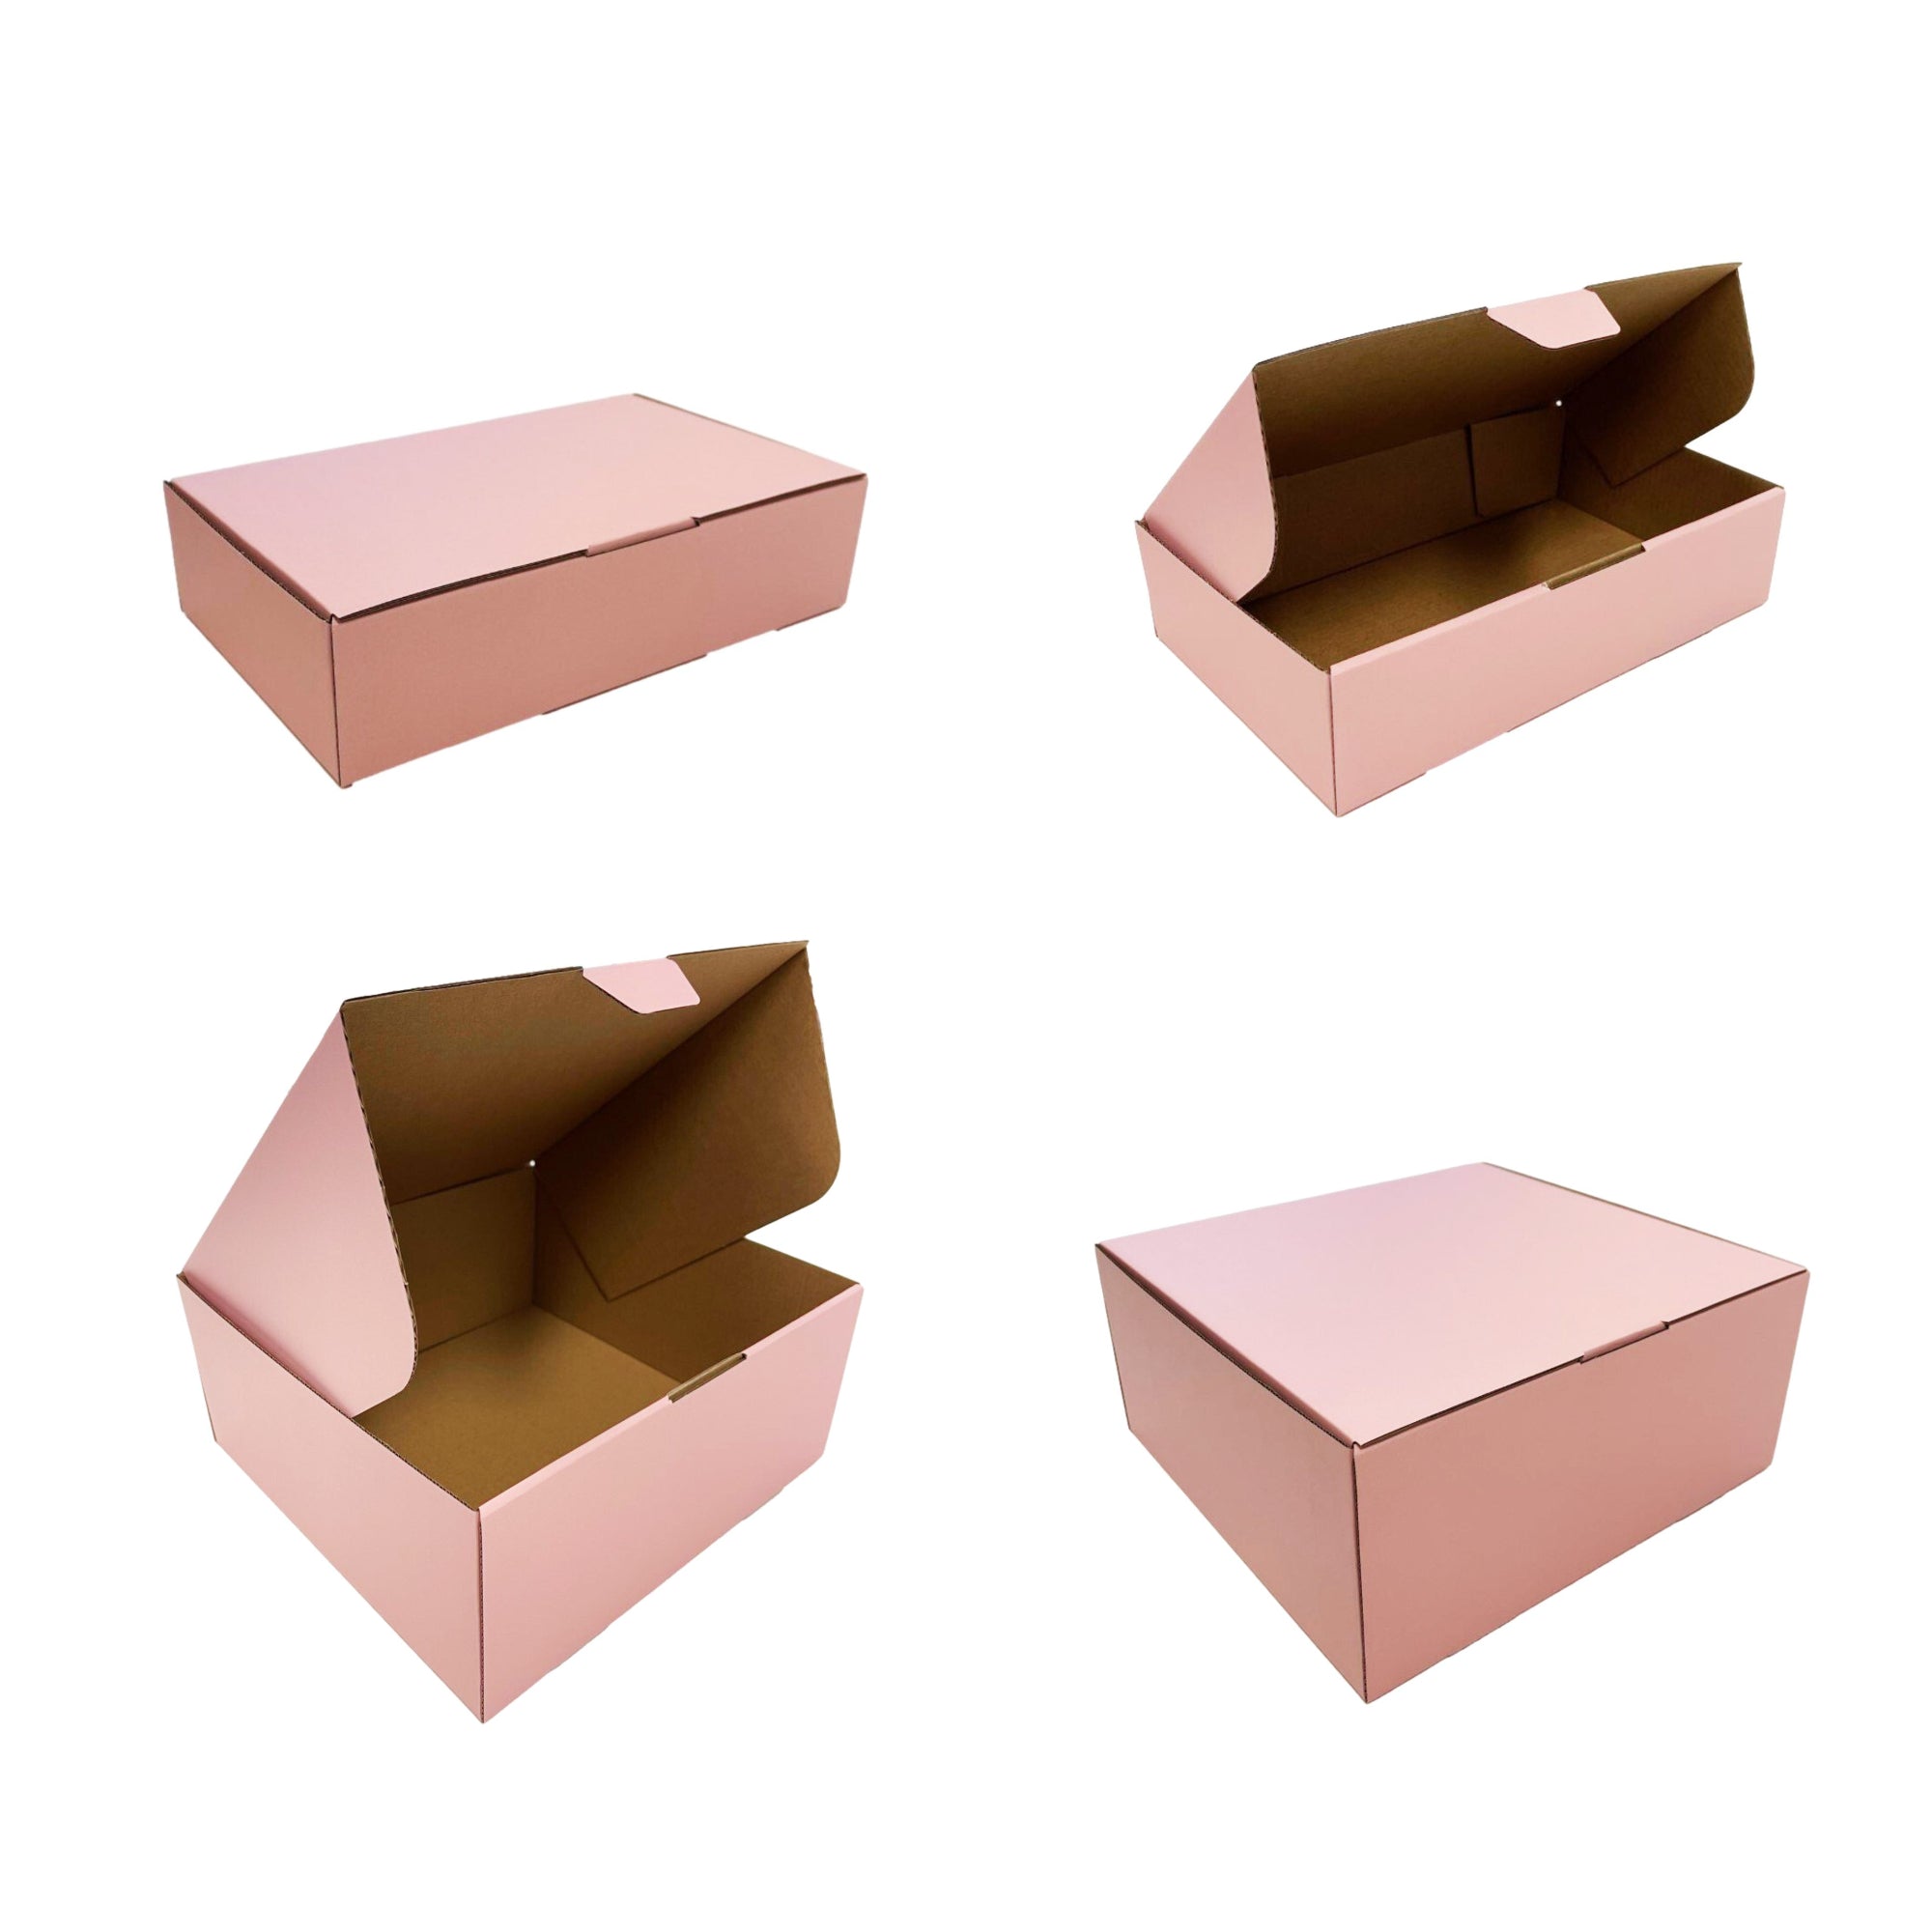 Samples of All Pink Gift Boxes & Die Cut Boxes [Cardboard Boxes] [Light Rose]